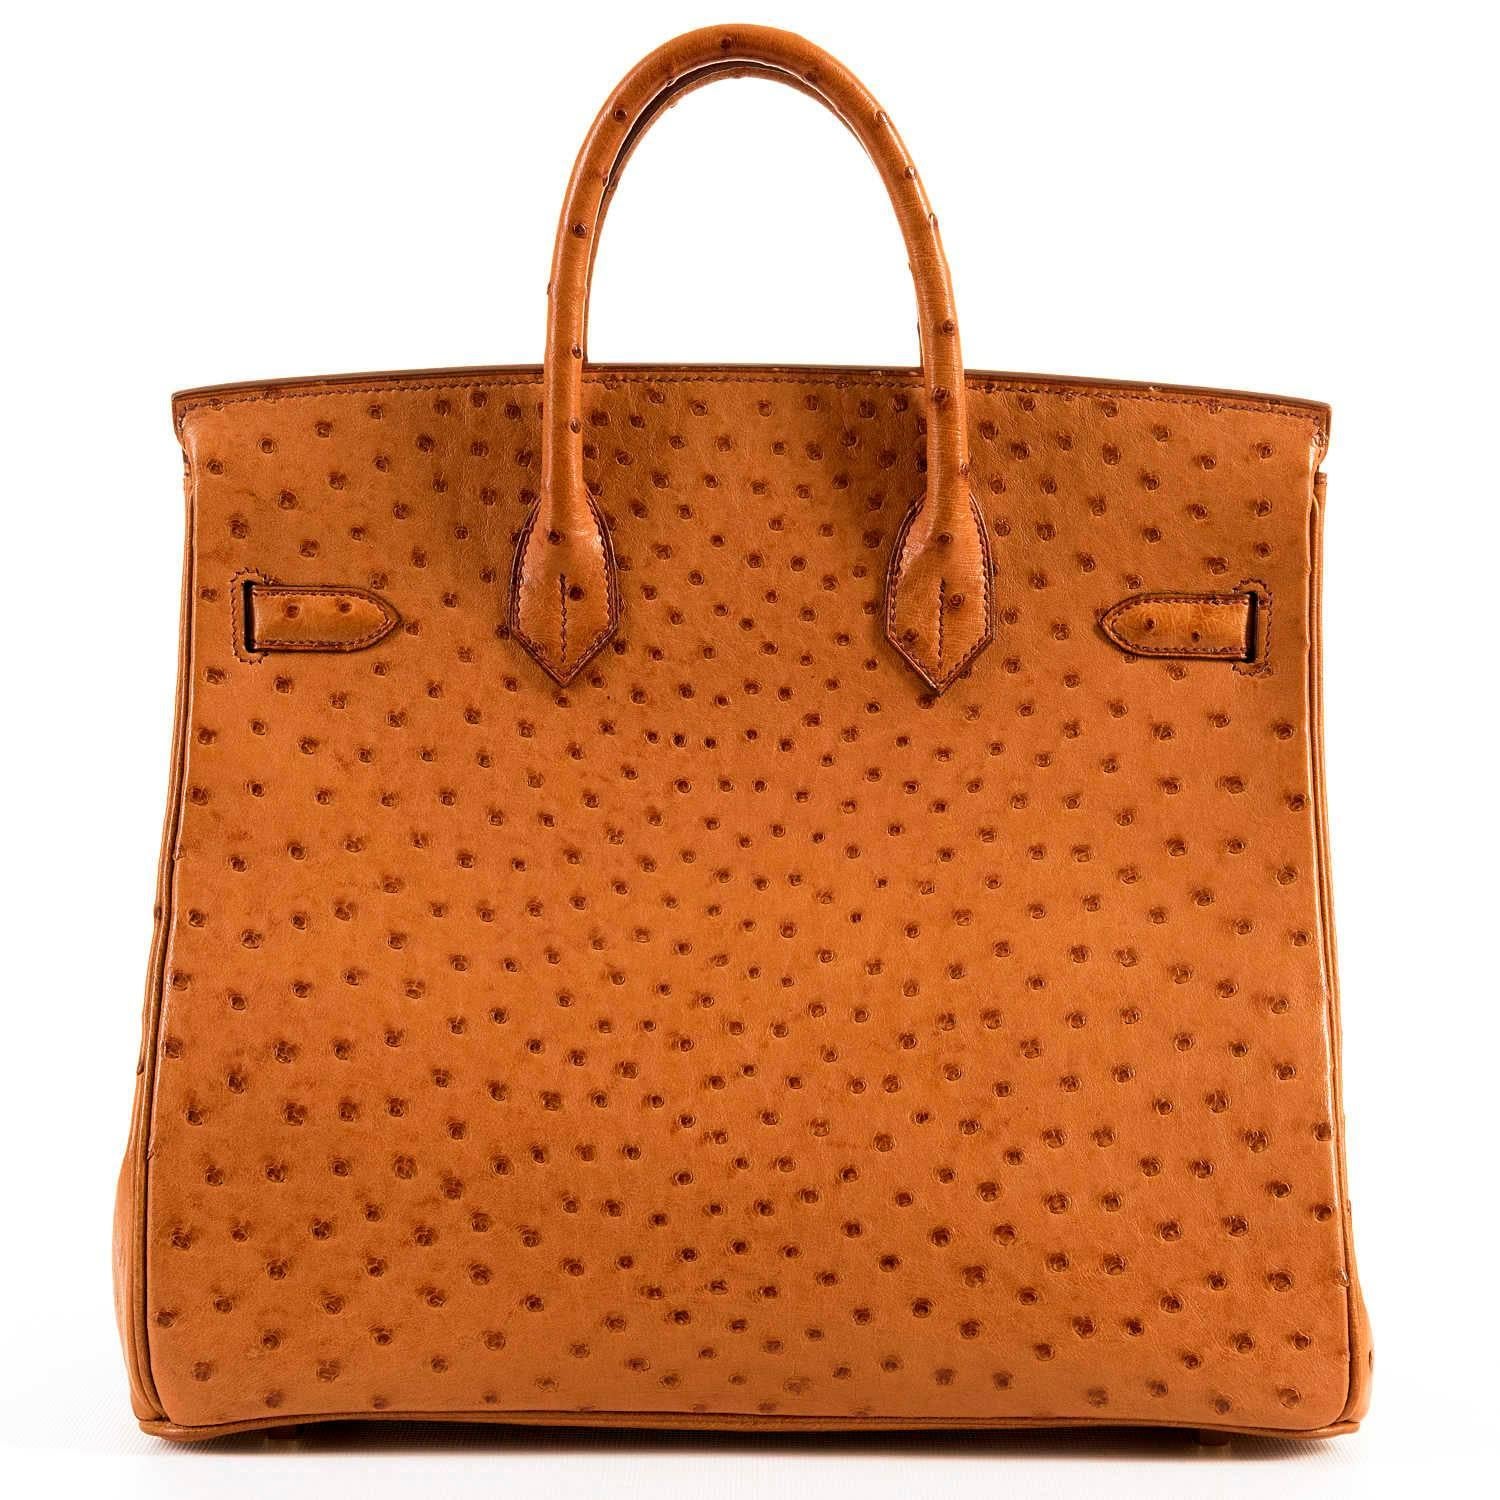 Ultimate Rare Luxury - A Hermes HAC Birkin Bag in Saffron colour Ostrich skin, beautifully accented with gold hardware. This Haut a Courroies - HAC Birkin has the Hermes blind stamp 'F' in a square, for 2002, and is in absolutely pristine condition